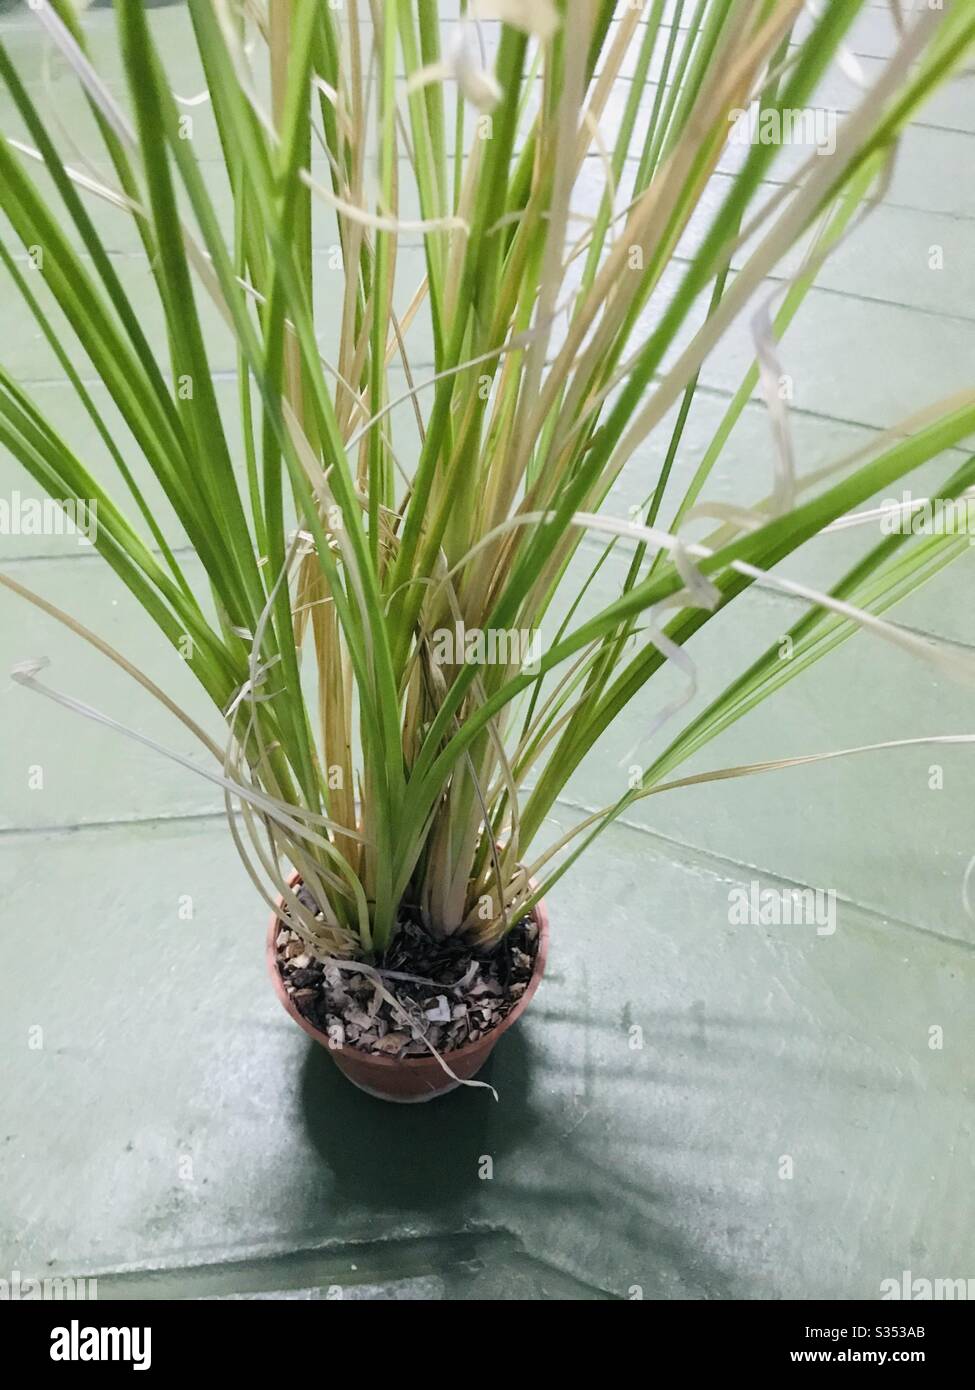 Home grown Chrysopogon Zizanioides grass before harvest- Ramacham in malayalam , Vetiver in Tamil, used for medicinal purpose , food & flavouring, perfume & aromatherapy, Singapore Stock Photo